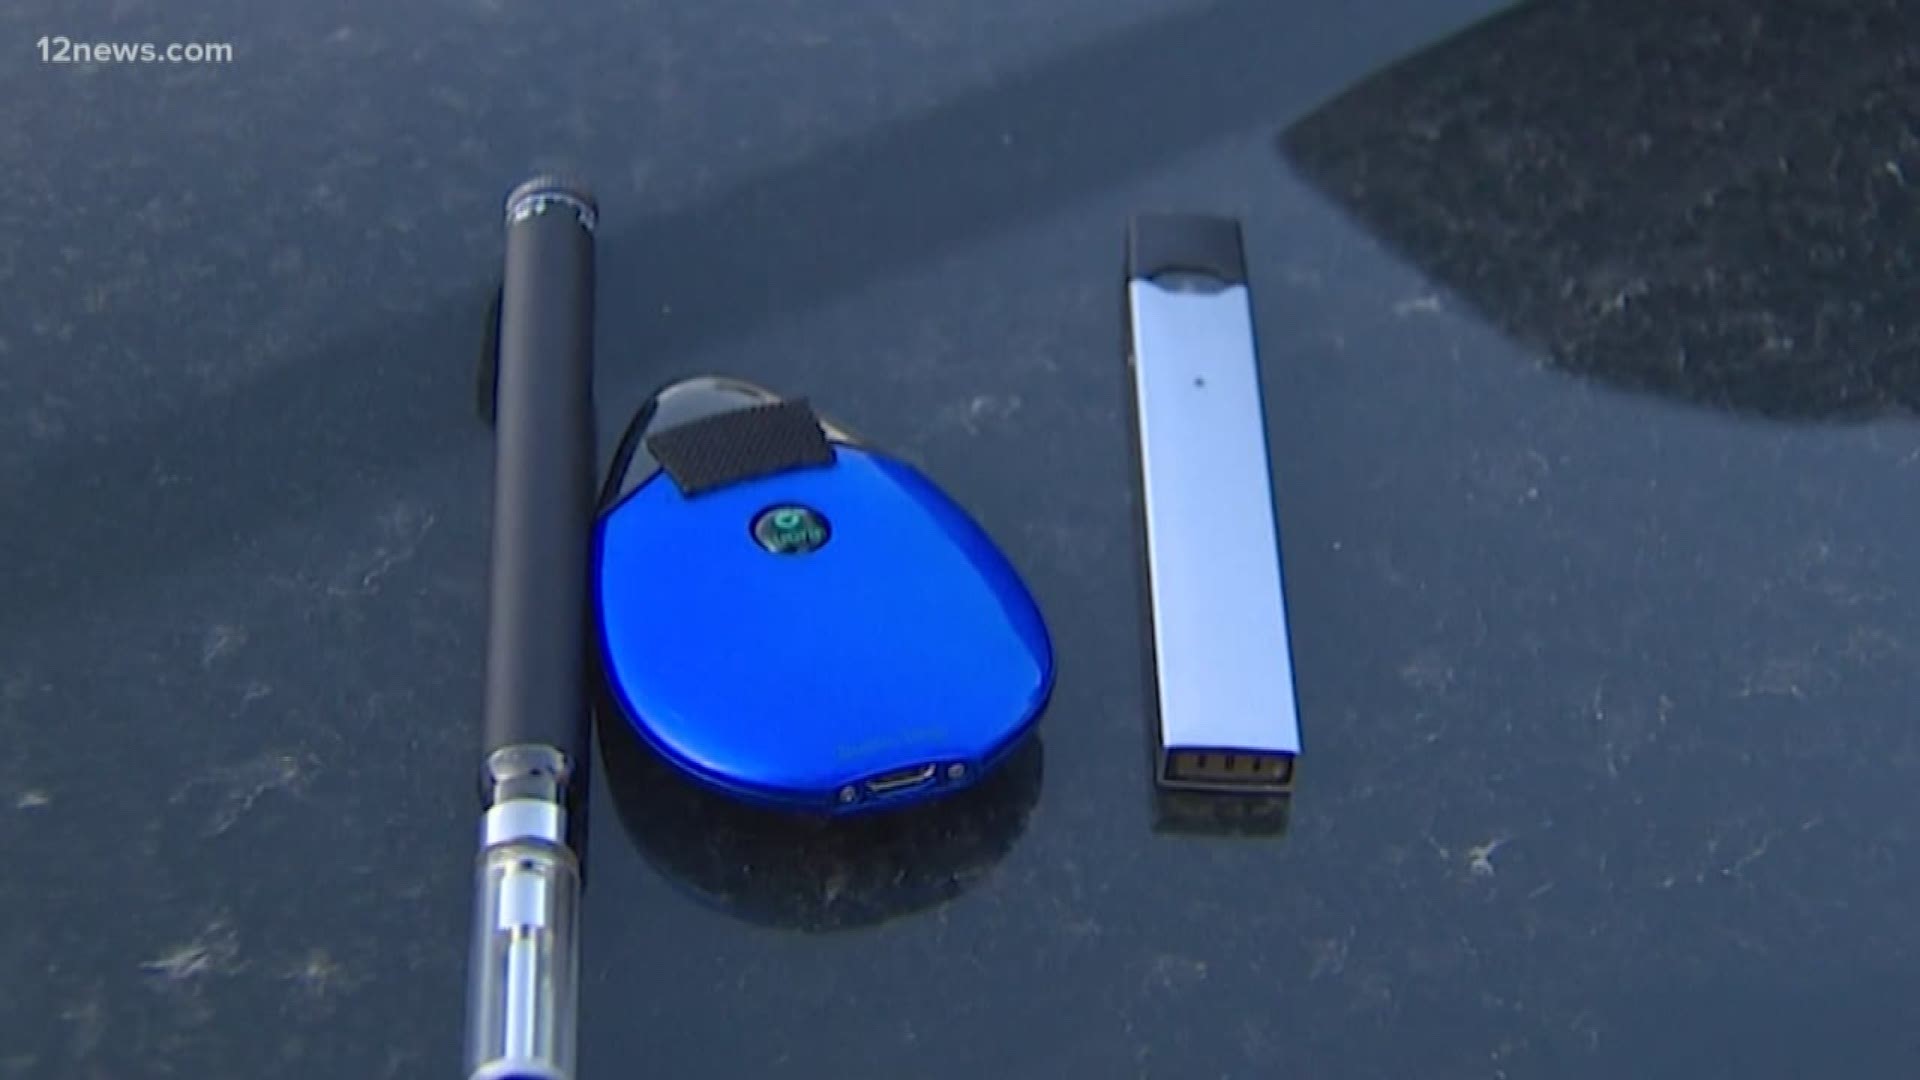 Pens. USB drives. White-out dispensers. Normal items in a student’s backpack that could be disguised vaping devices.